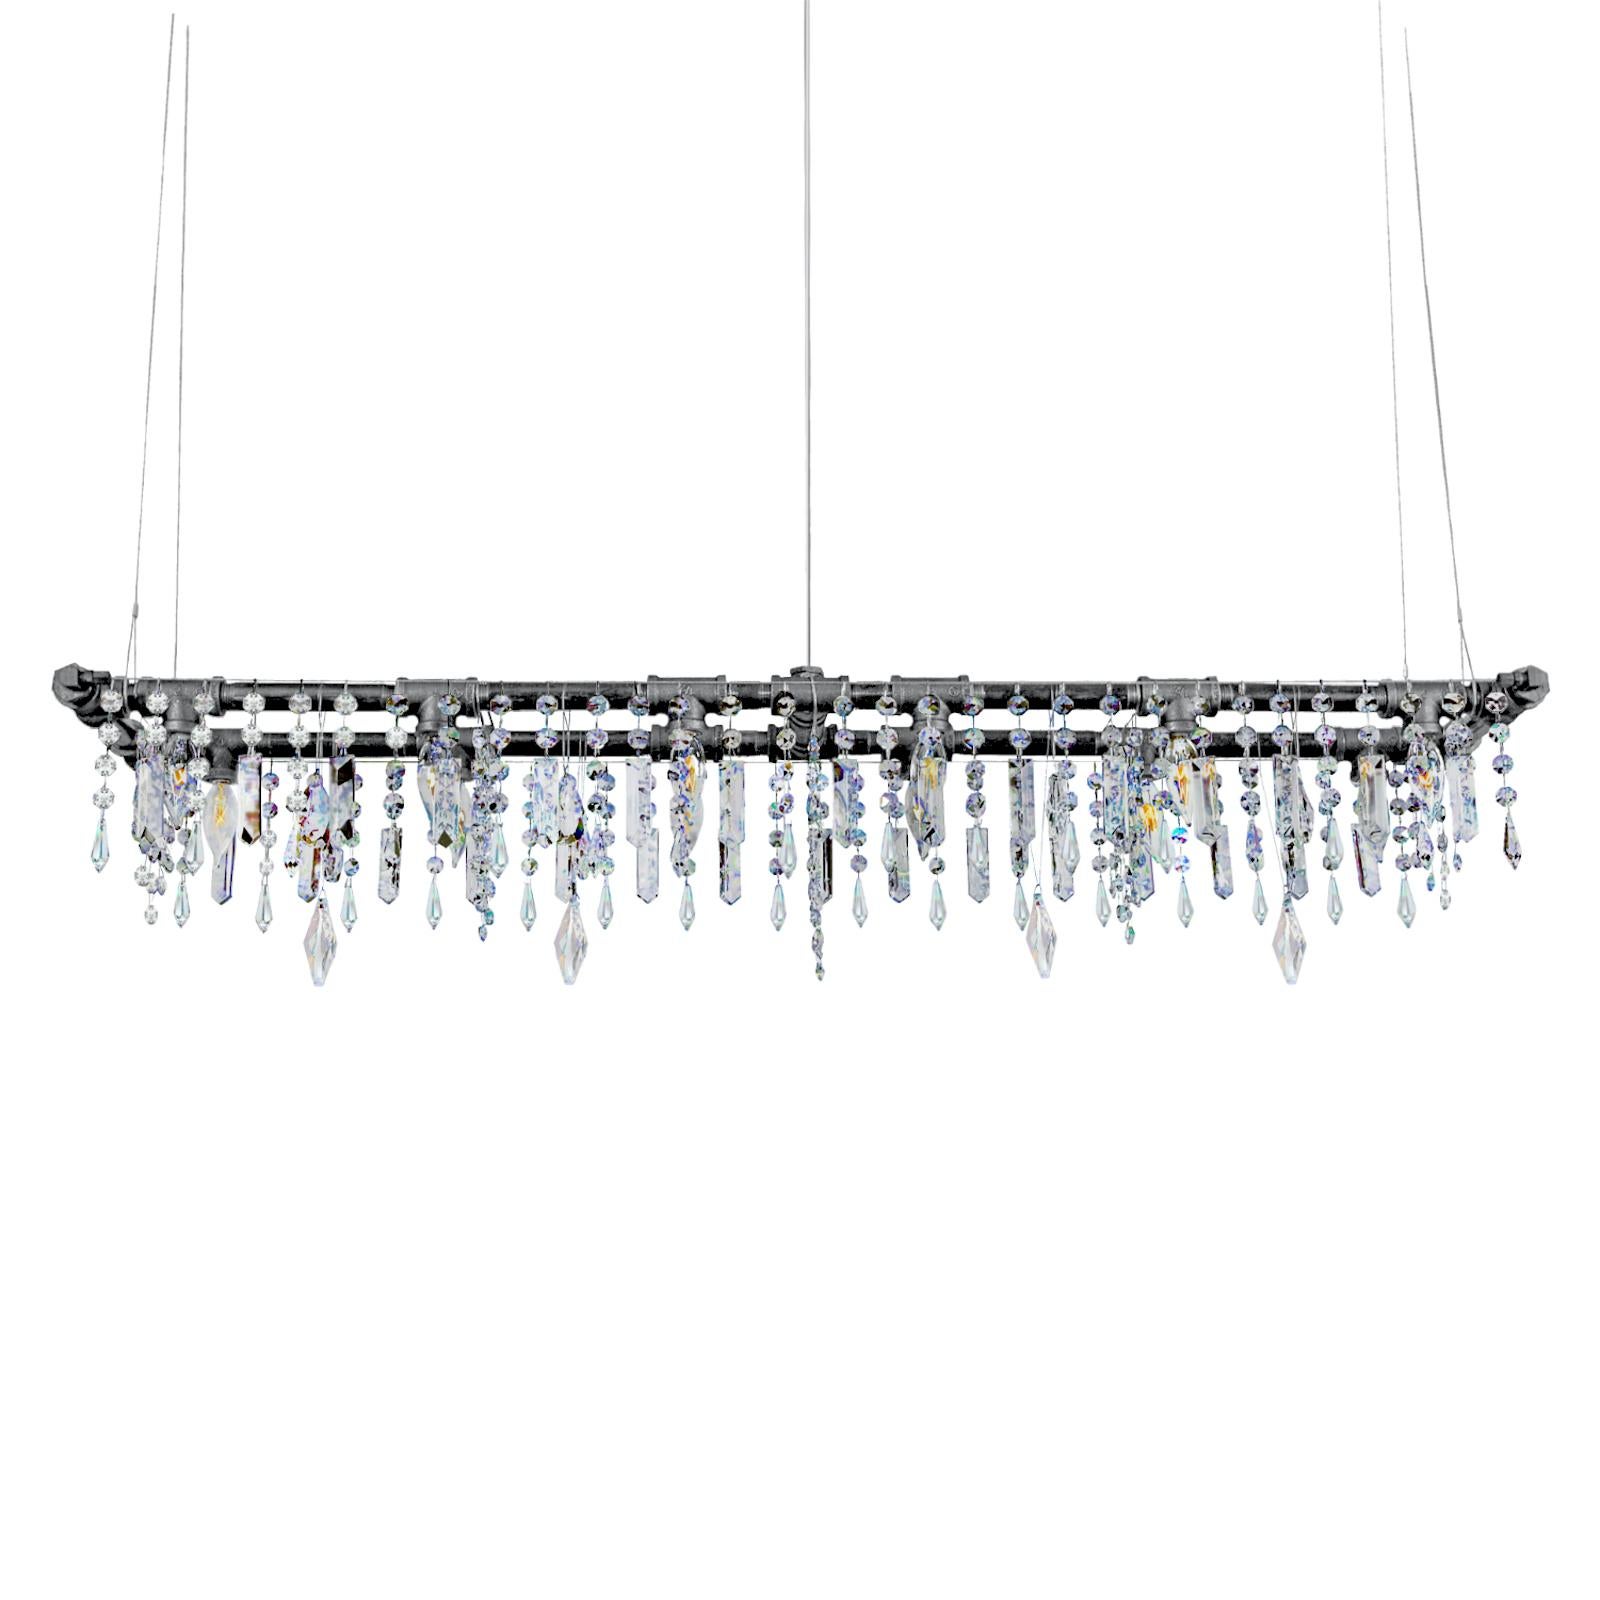 Tribeca Banqueting chandelier, 12 bulb, by Michael McHale
Dimensions: D 23 x W 106 x H 23 cm.
Materials: steel, optically-pure gem-cut crystal.

12 x candelabra base CA7 bulb, either incandescent or LED.

All our lamps can be wired according